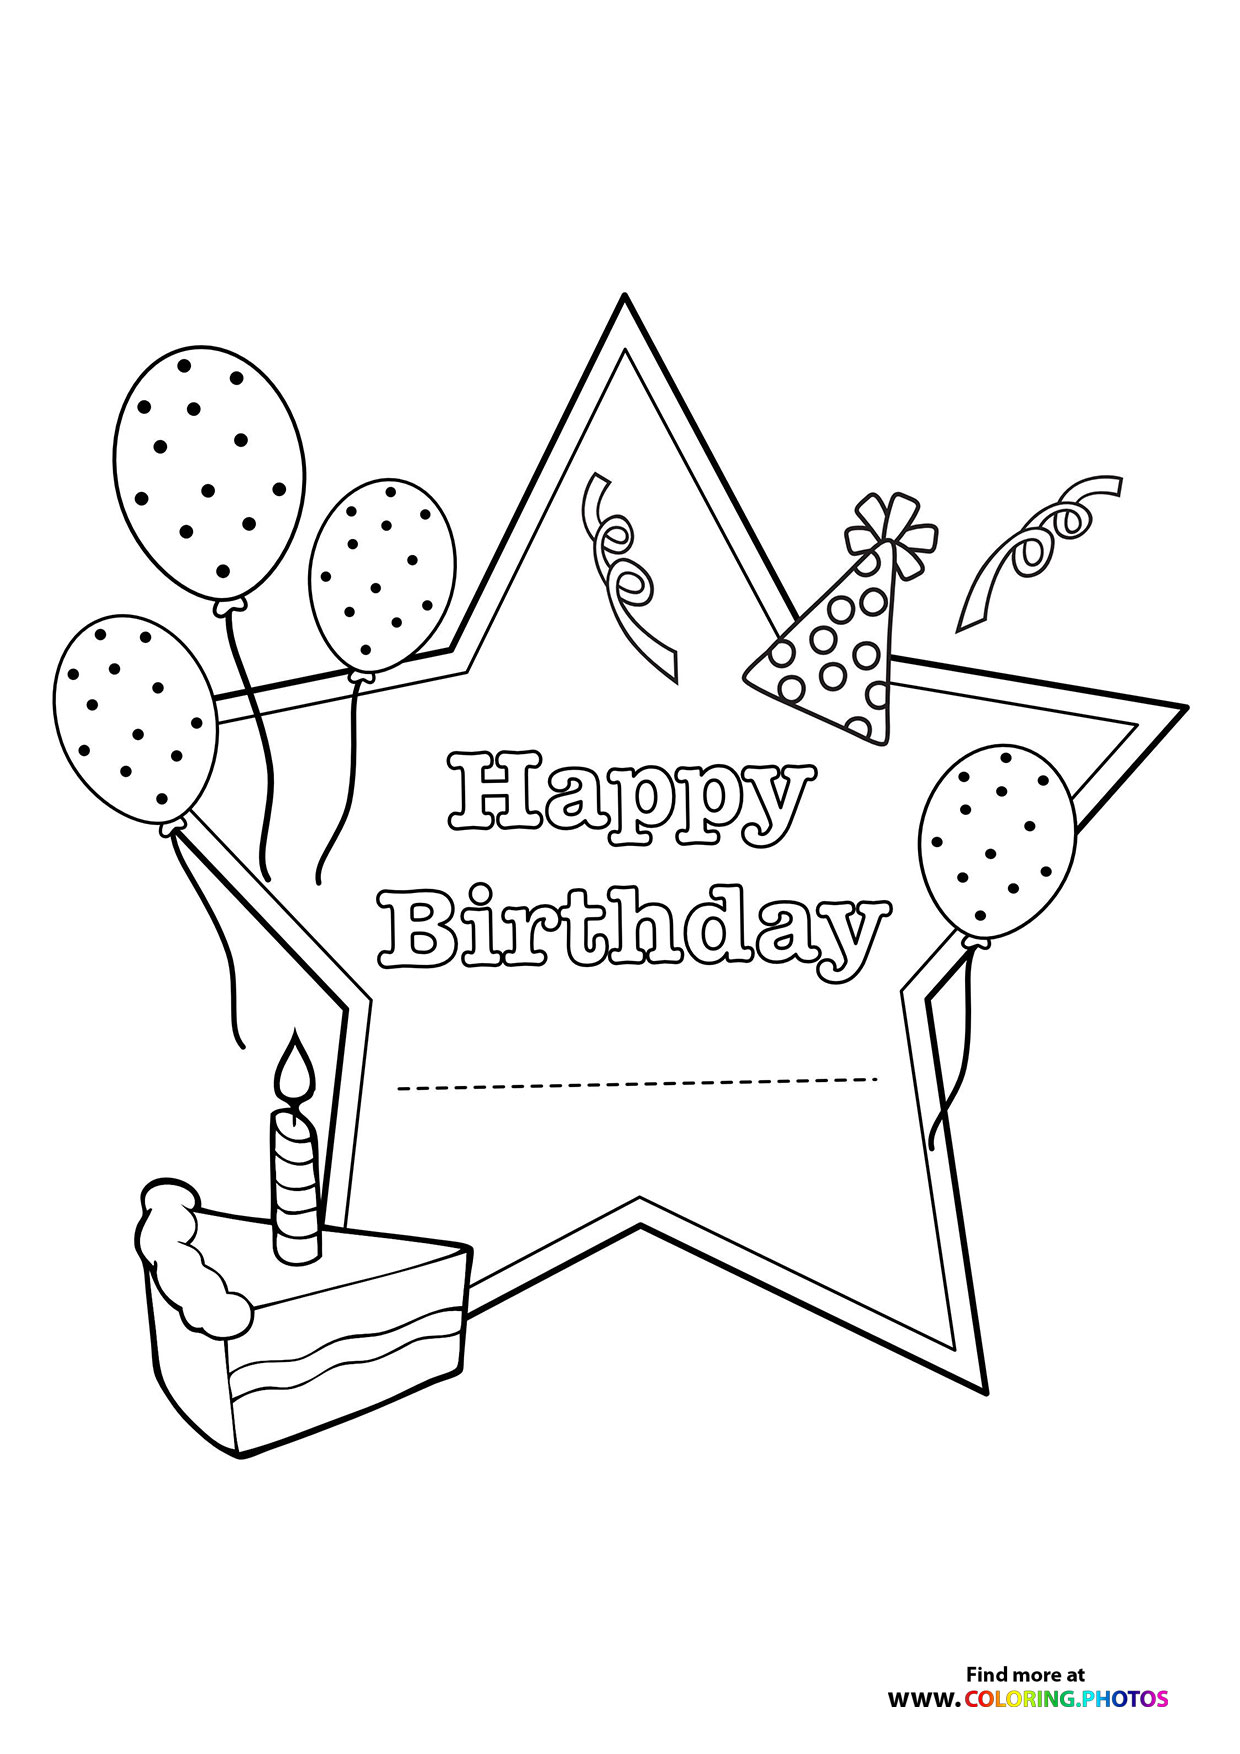 happy birthday coloring pages for kids free and easy print or download